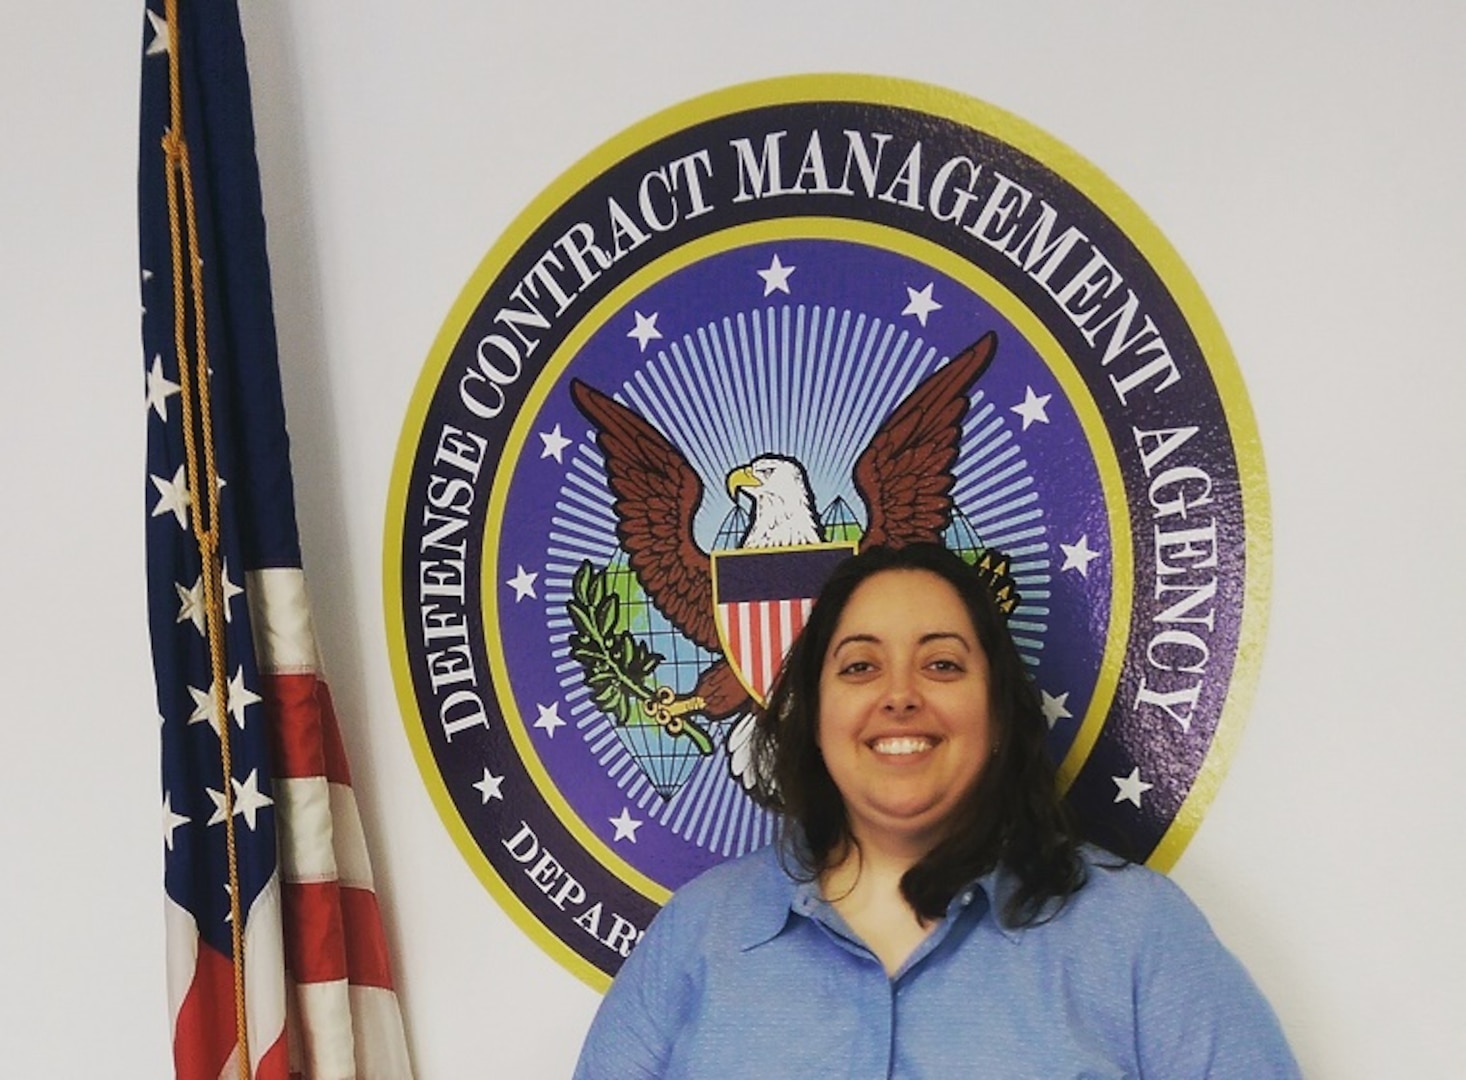 Amber Veliz, a contracting intern at Defense Contract Management Agency Los Angeles, participated in an academic program at the University of Arizona in June designed to help veterans excel in college and their future careers. (Photo courtesy of Amber Veliz)

